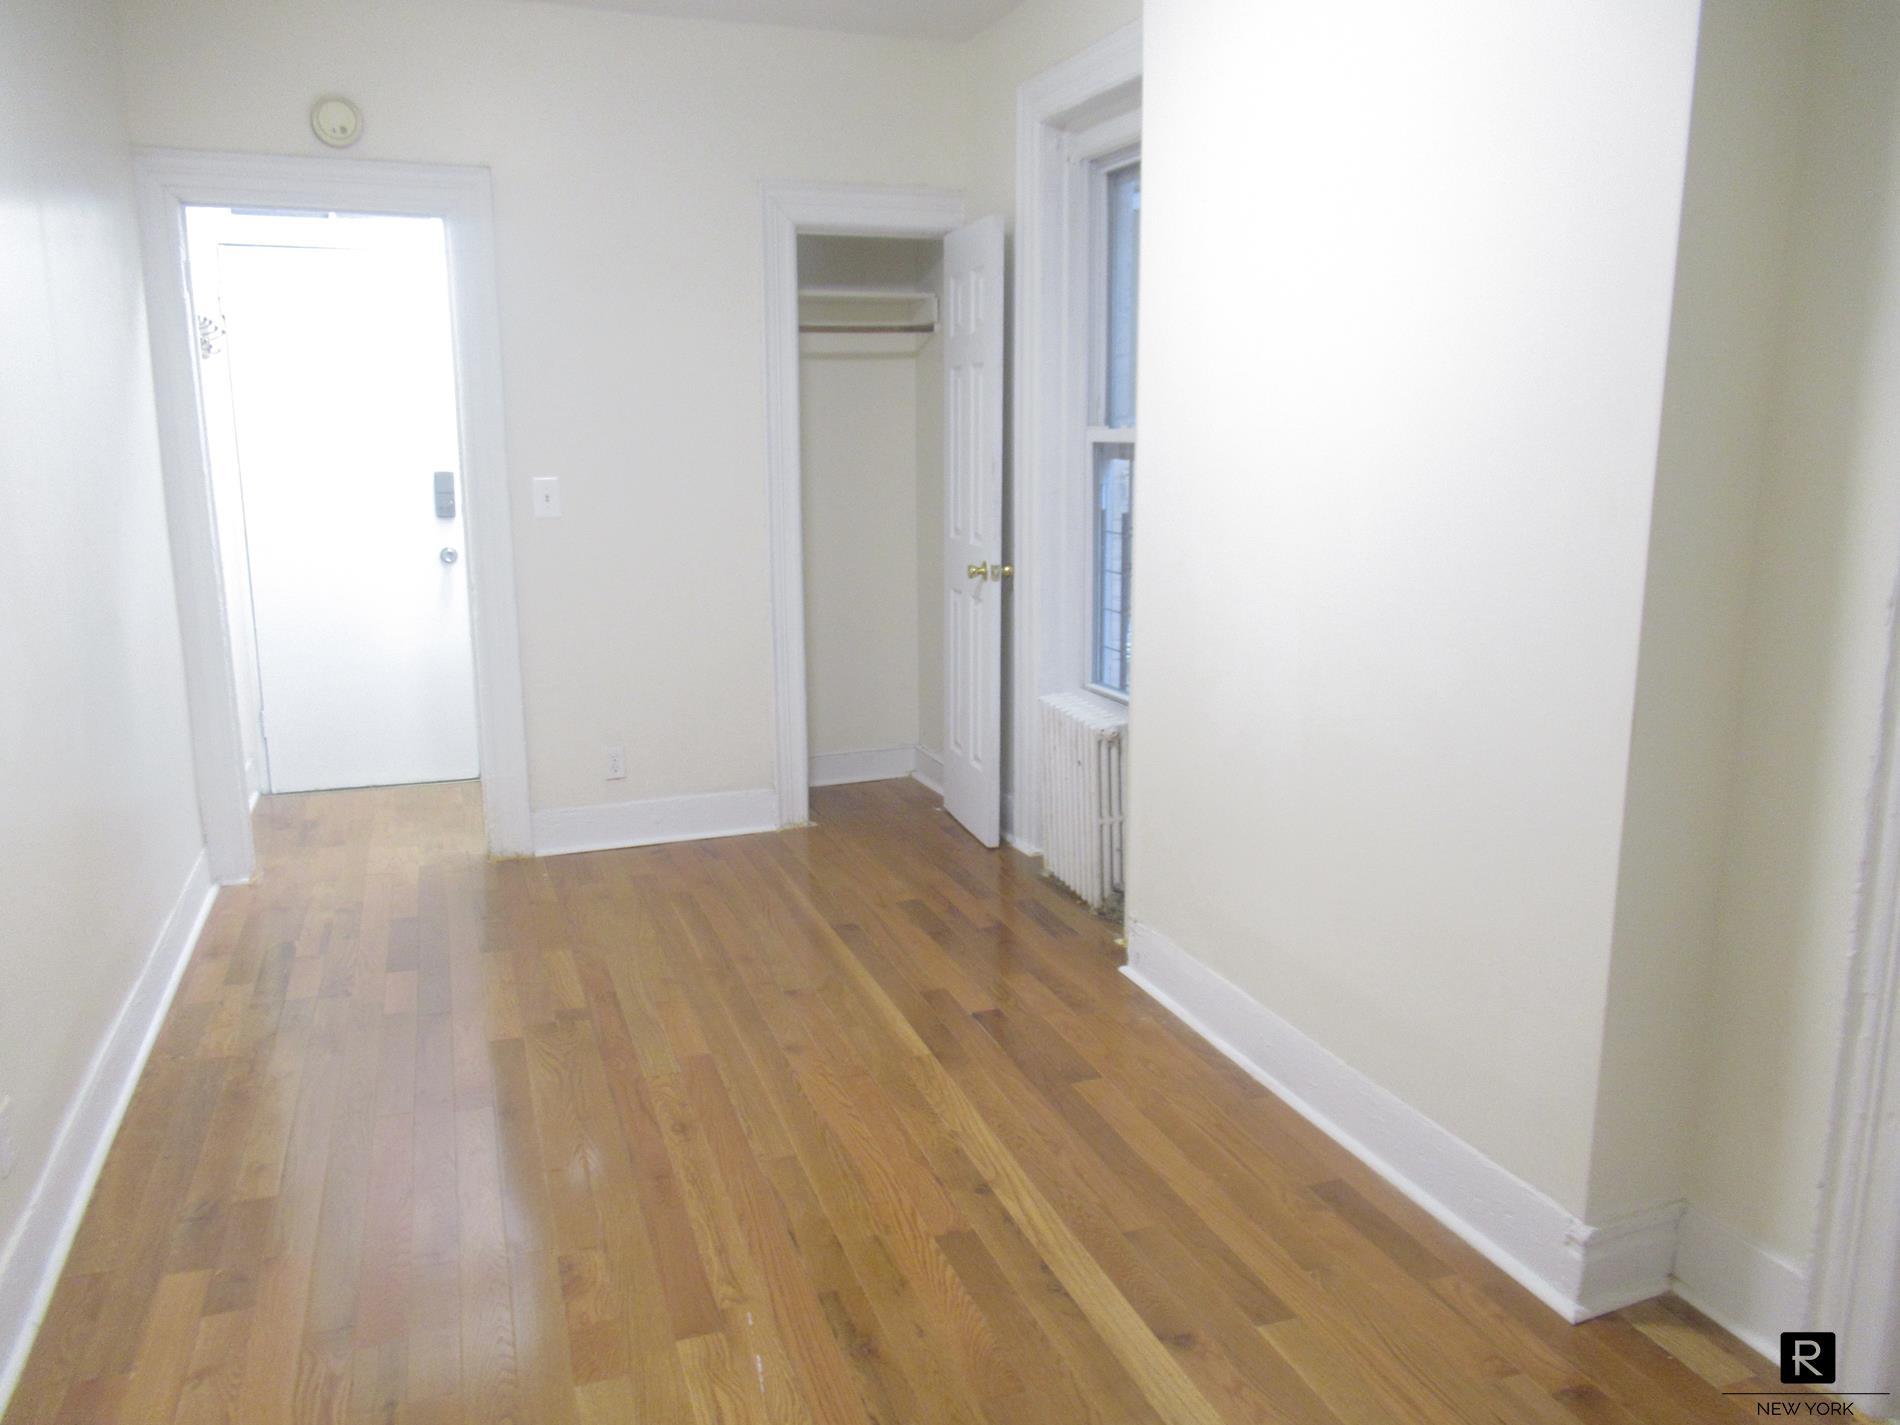 443 Lincoln Place Prospect Heights Brooklyn NY 11238